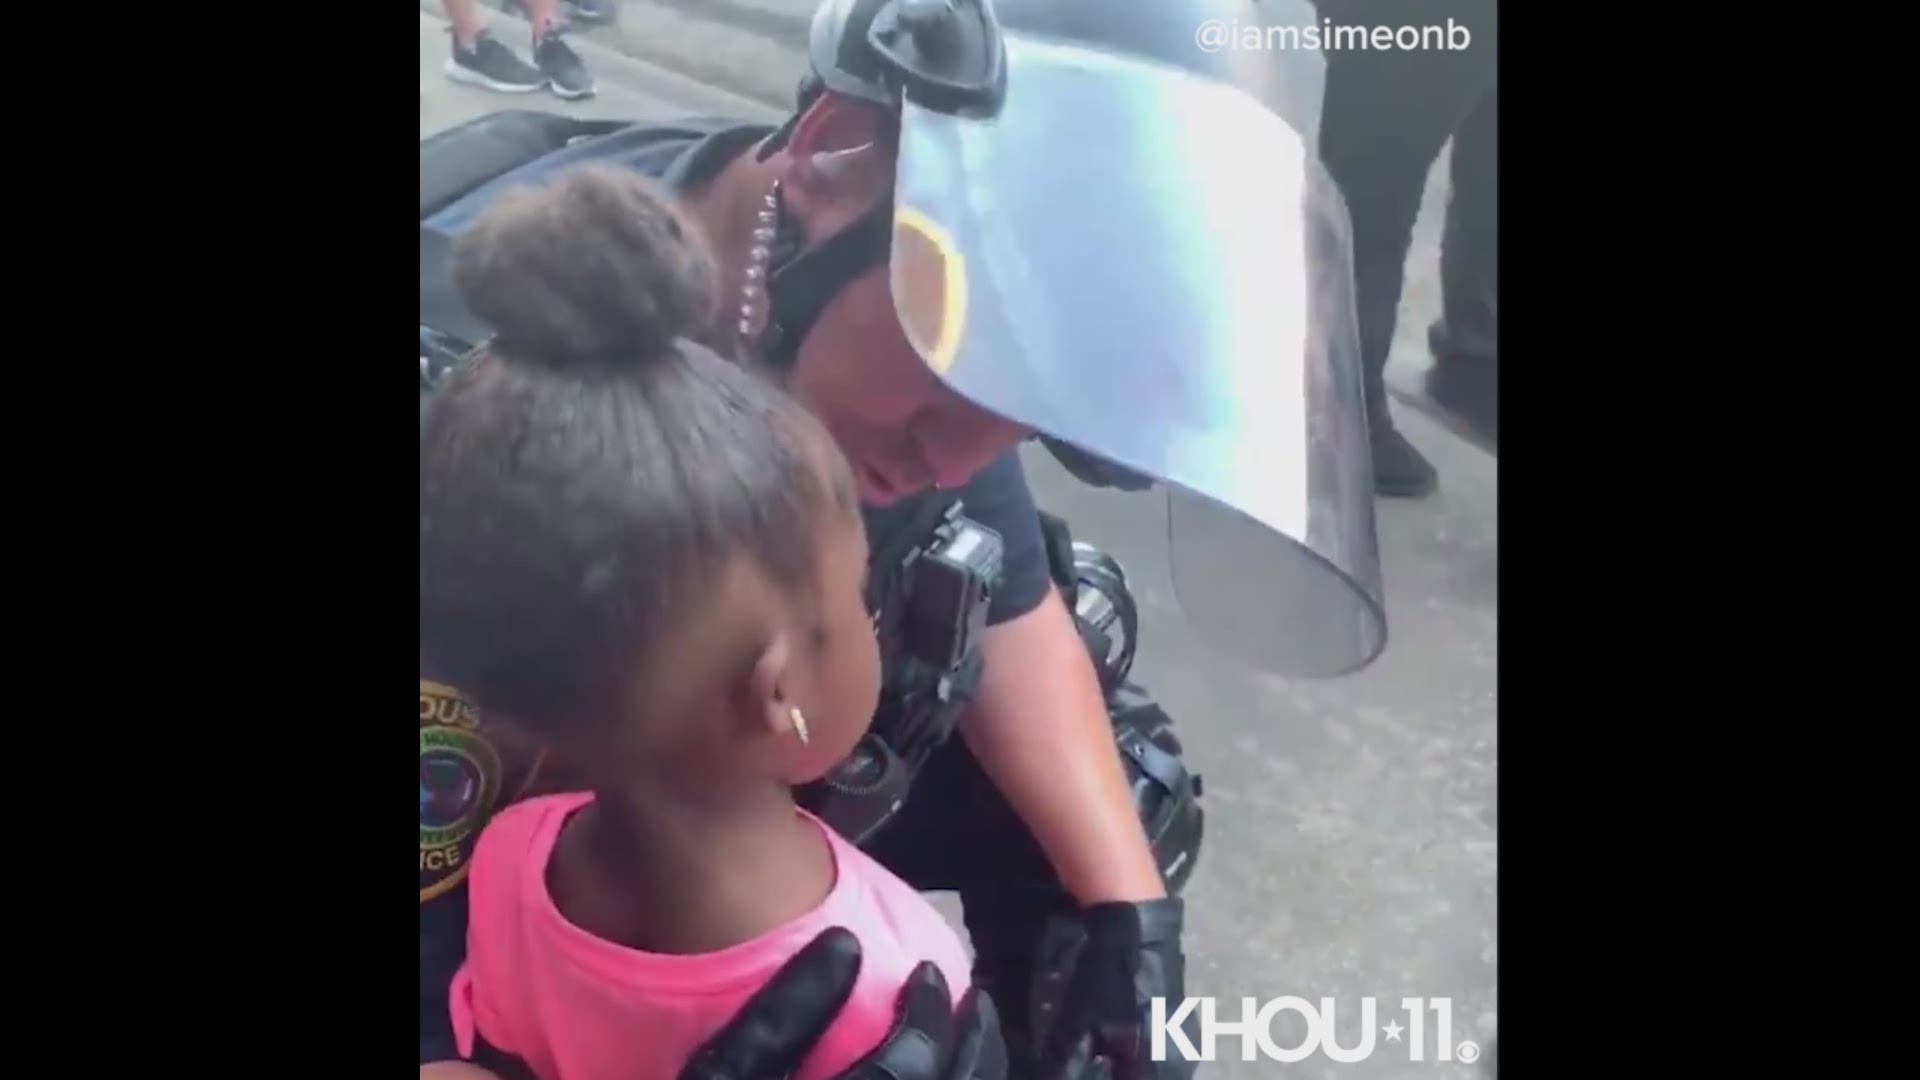 An HPD officer had some comforting words for a little girl who was crying during the march on June 2.